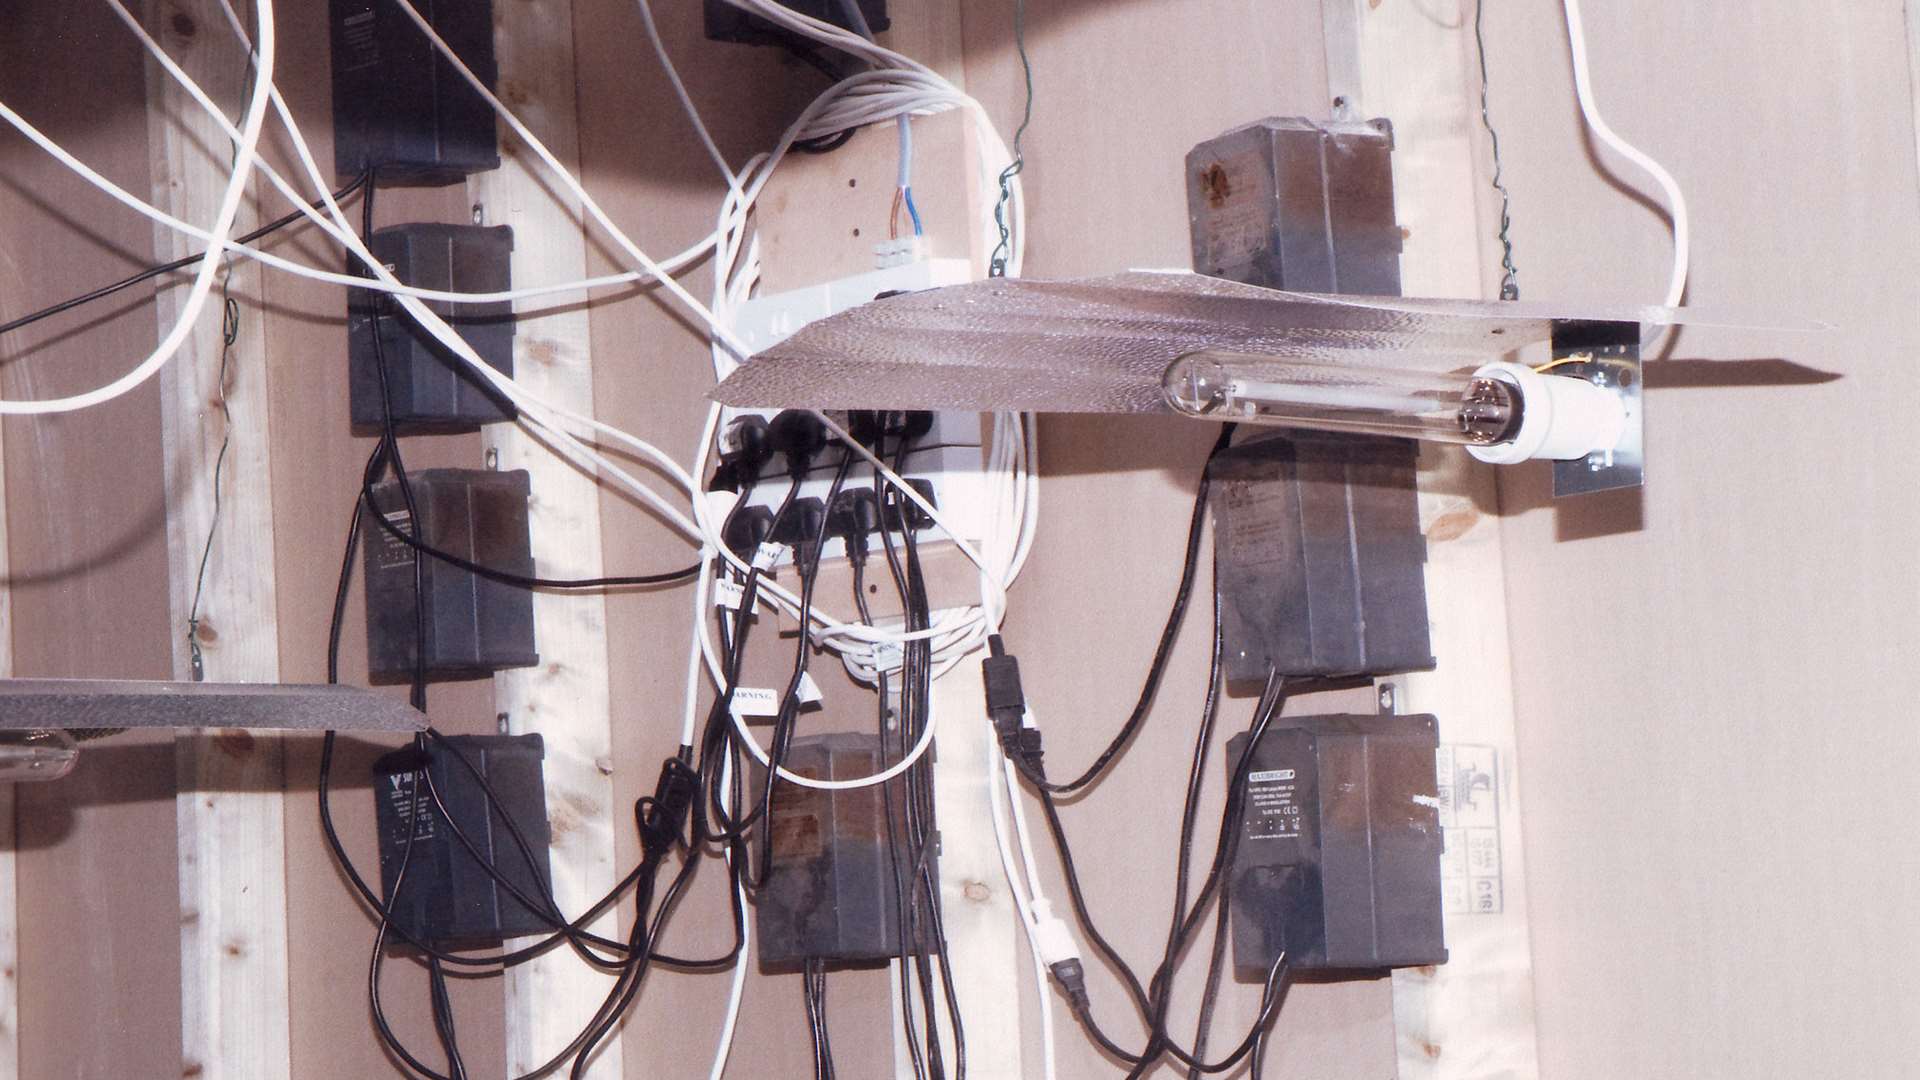 Electricity that had been bypassed at a Dover drugs factory